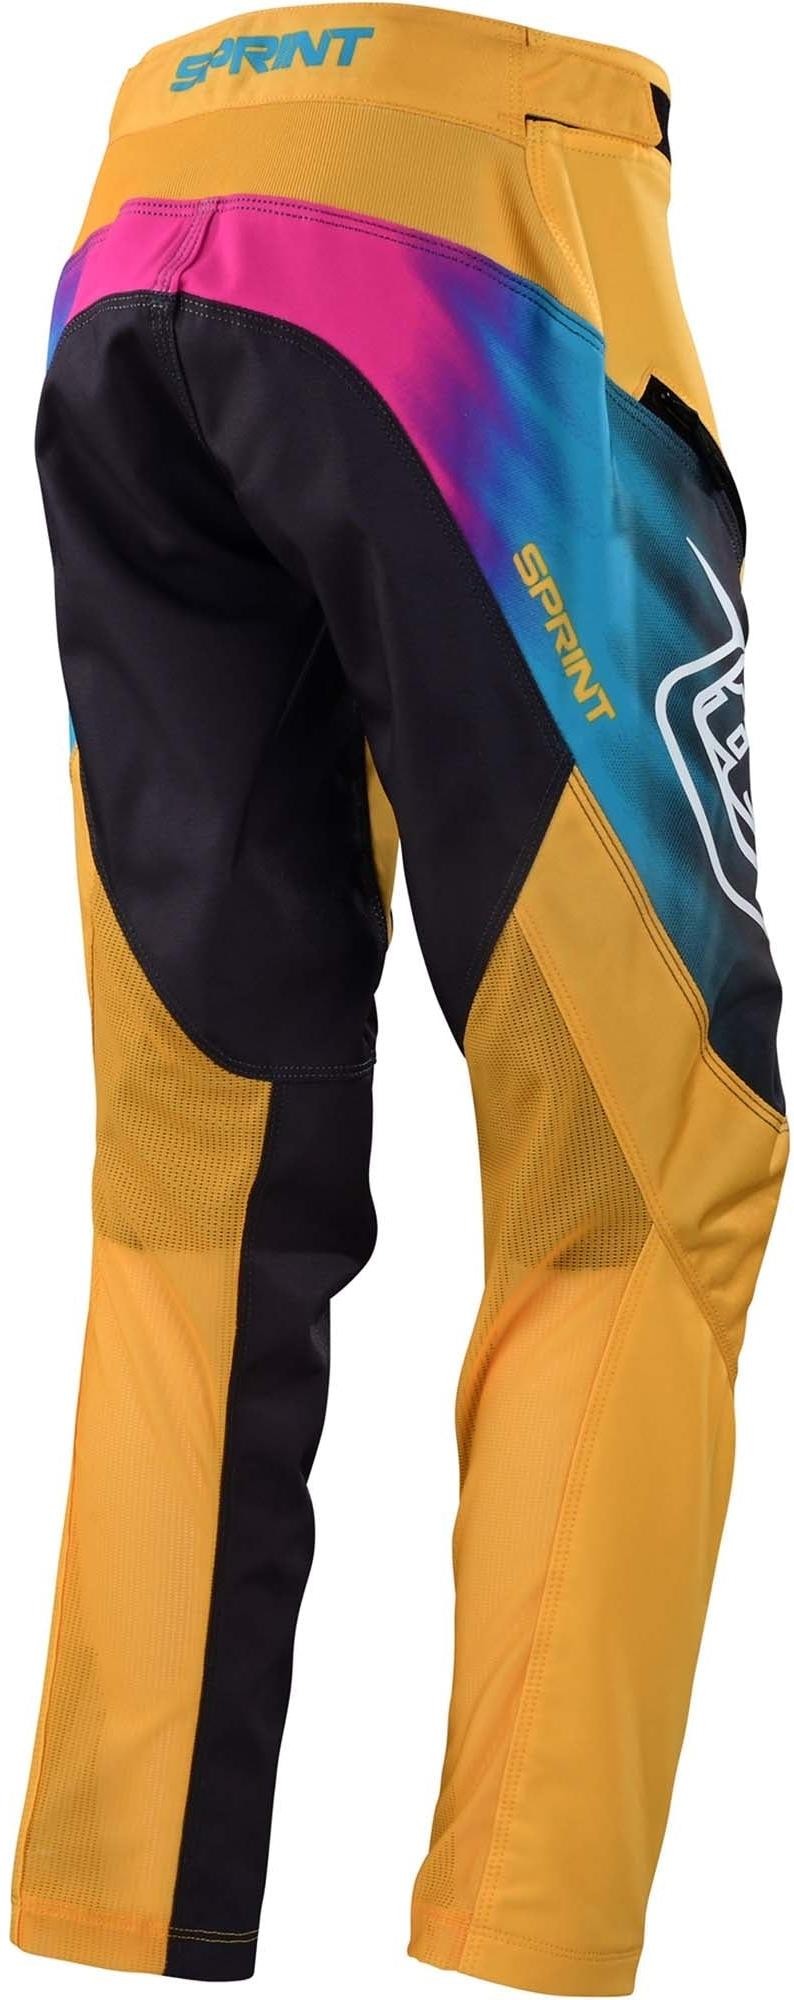 Sprint Youth MTB Cycling Trousers image 1